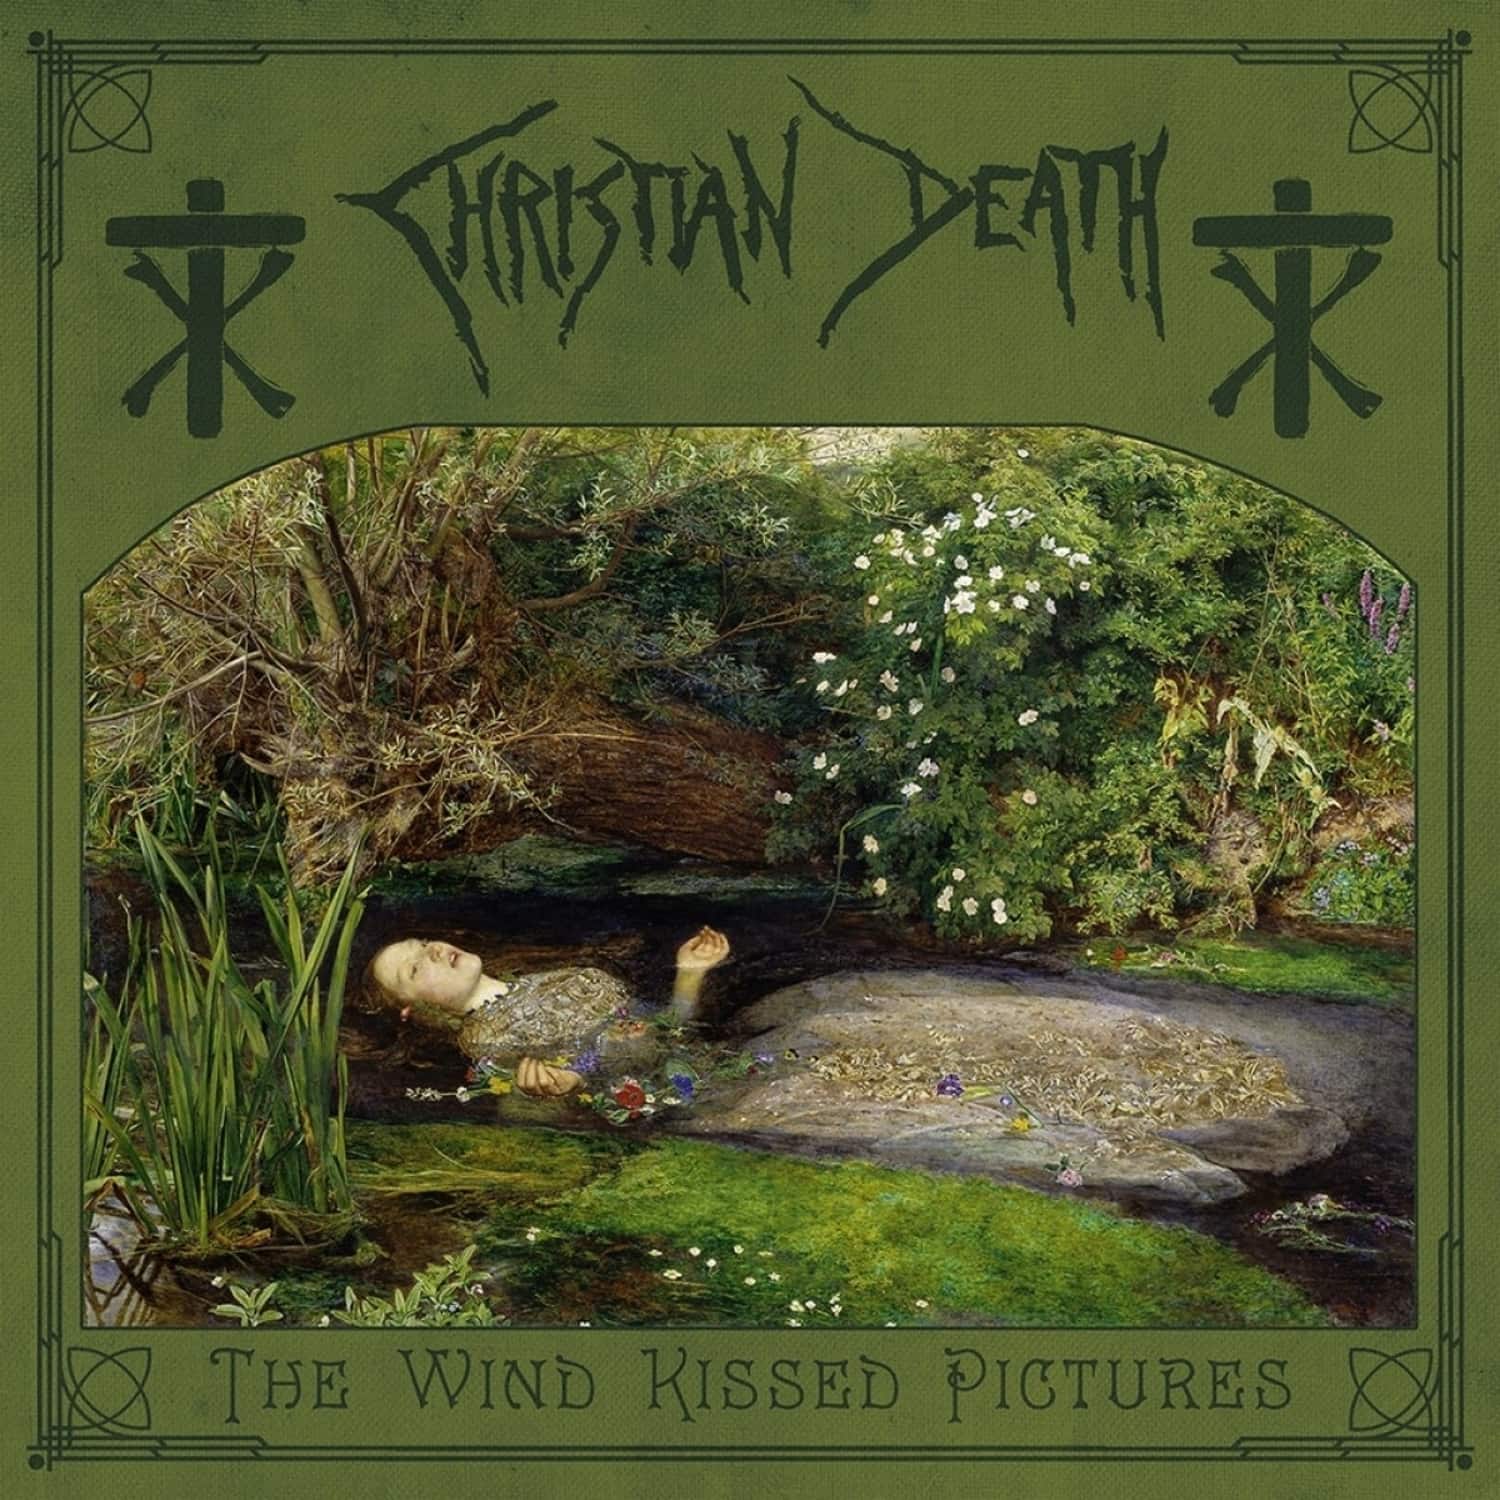 Christian Death - THE WIND KISSED PICTURES-2021 ED.